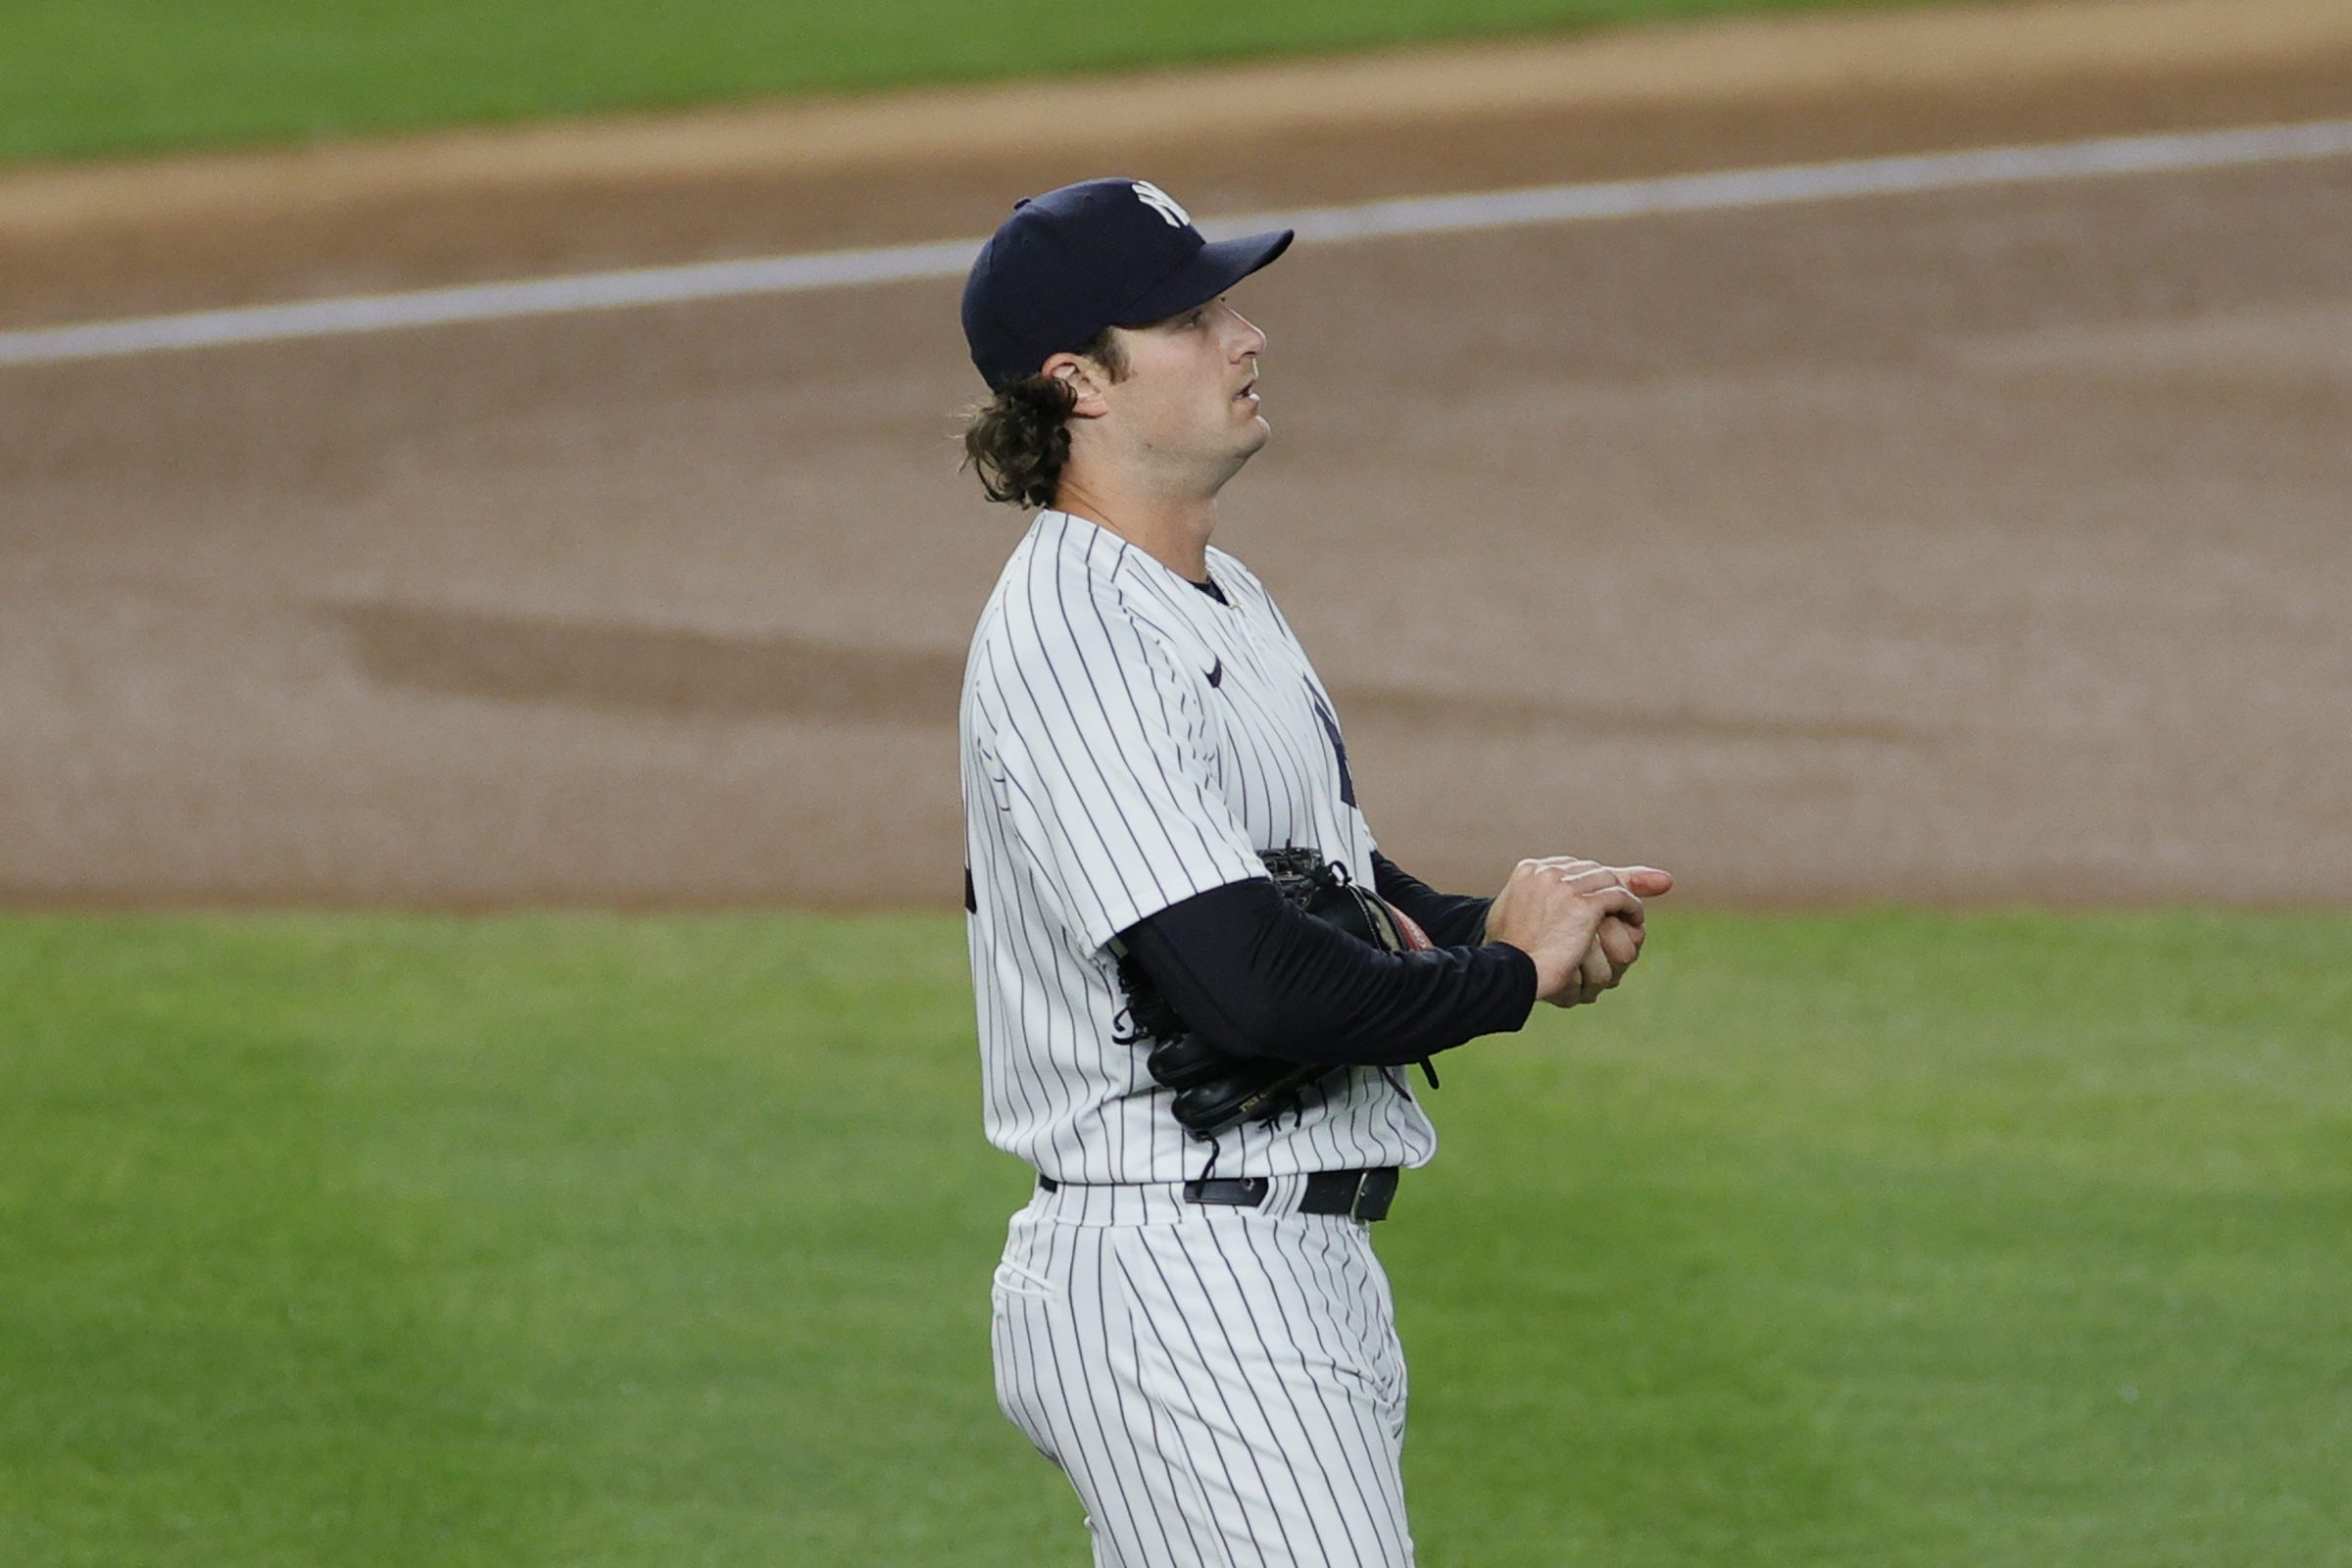 Gerrit Cole of the Yankees rubs up a baseball, with what we can presume is nothing at all, just a normal thing you do with your hands.